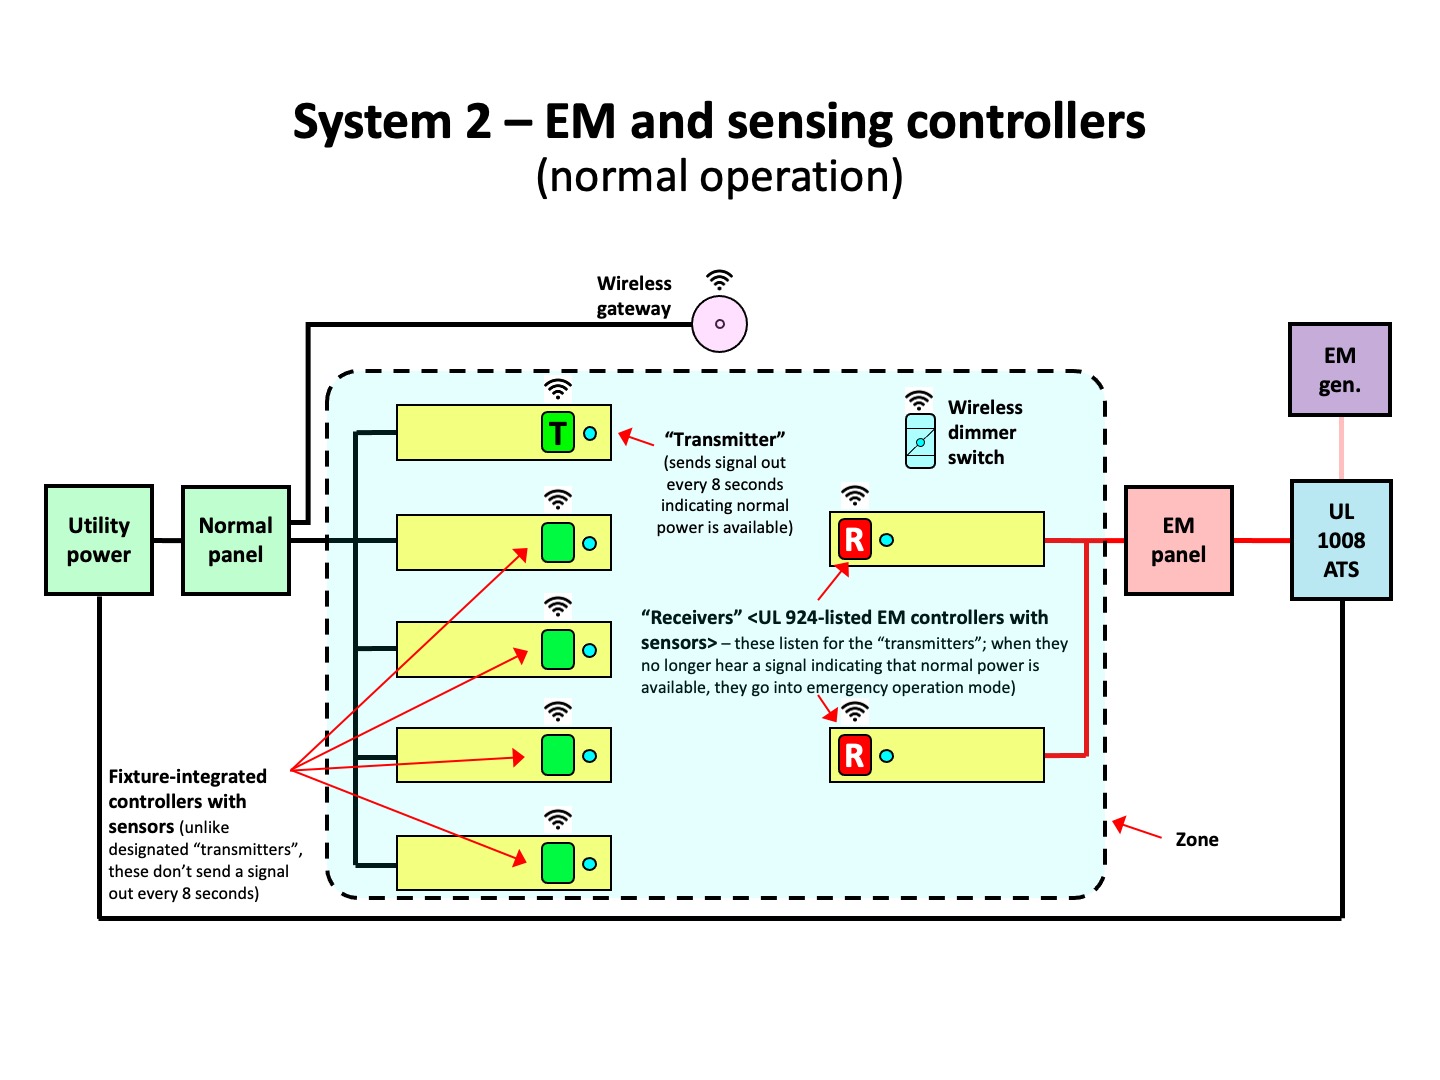 System 2 – EM and sensing controllers (normal operation)